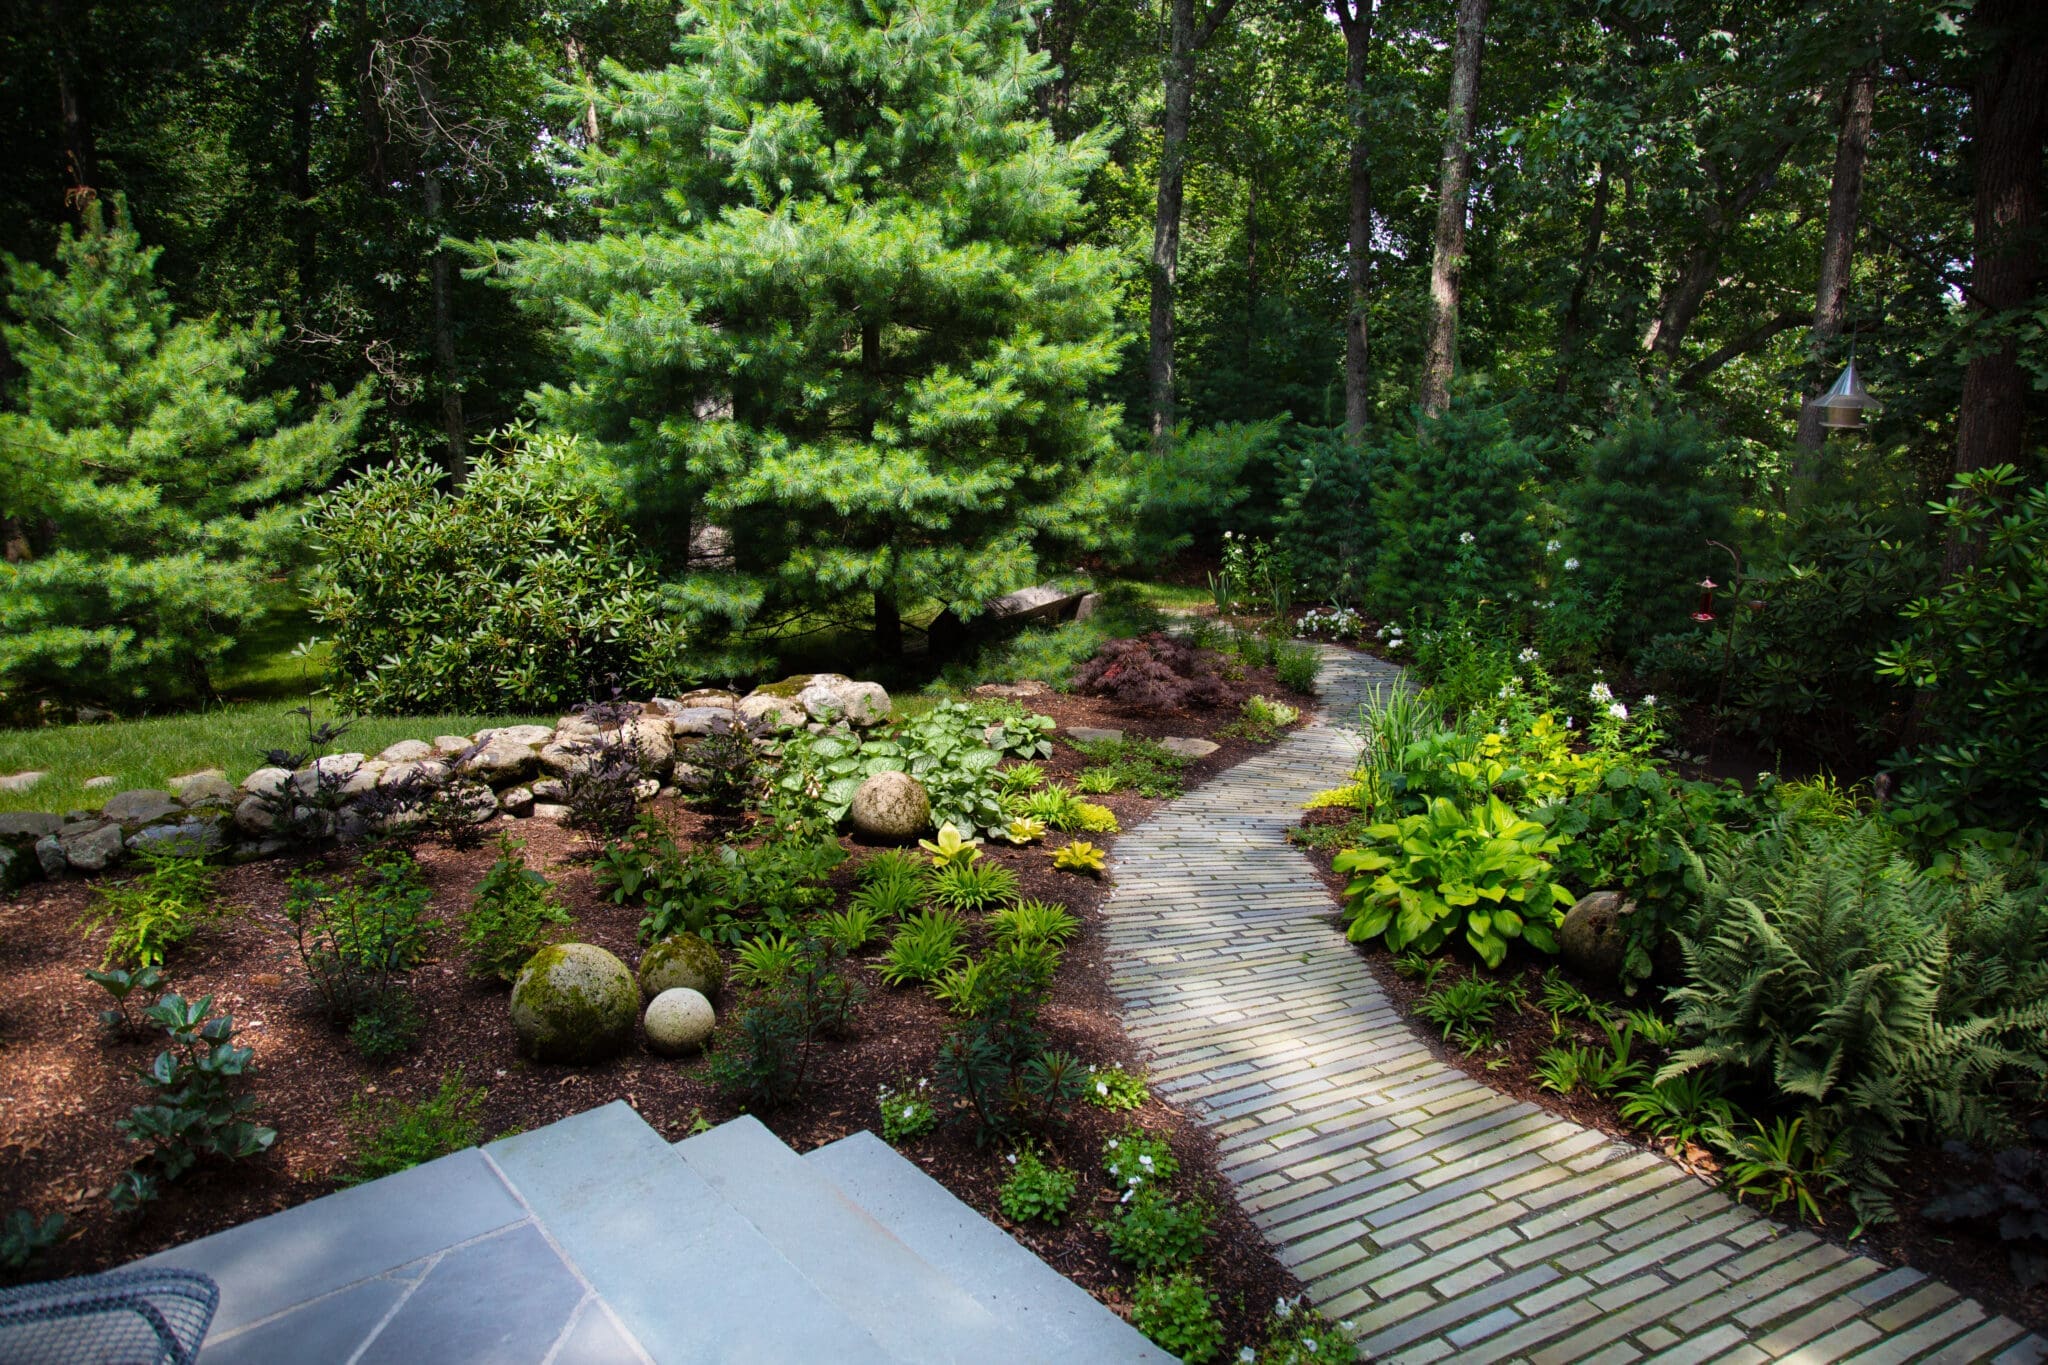 A photo of a stone pathway with a landscaped garden and coniferous trees on either side.